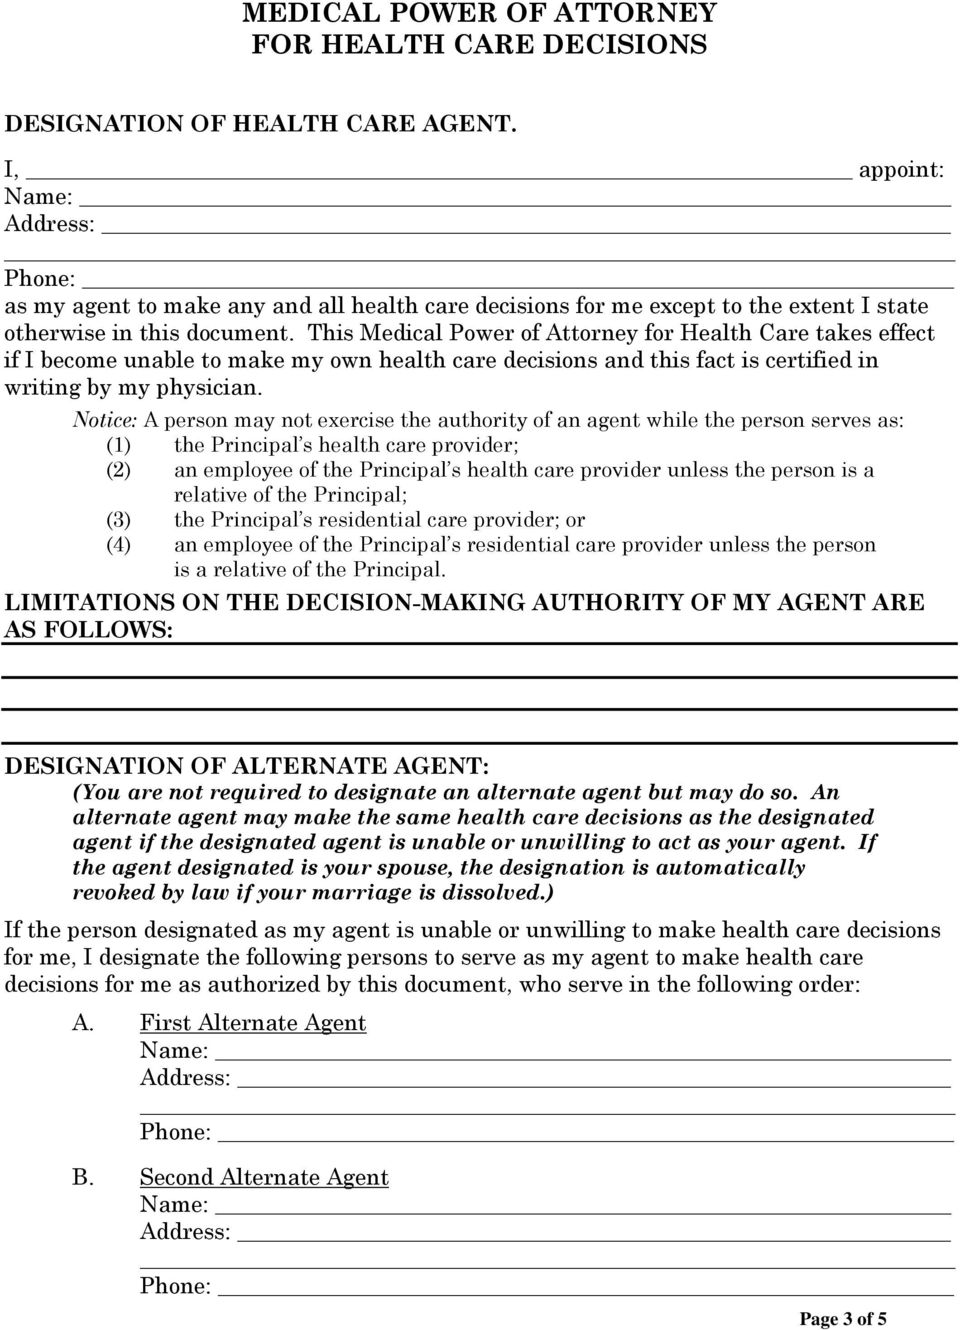 This Medical Power of Attorney for Health Care takes effect if I become unable to make my own health care decisions and this fact is certified in writing by my physician.